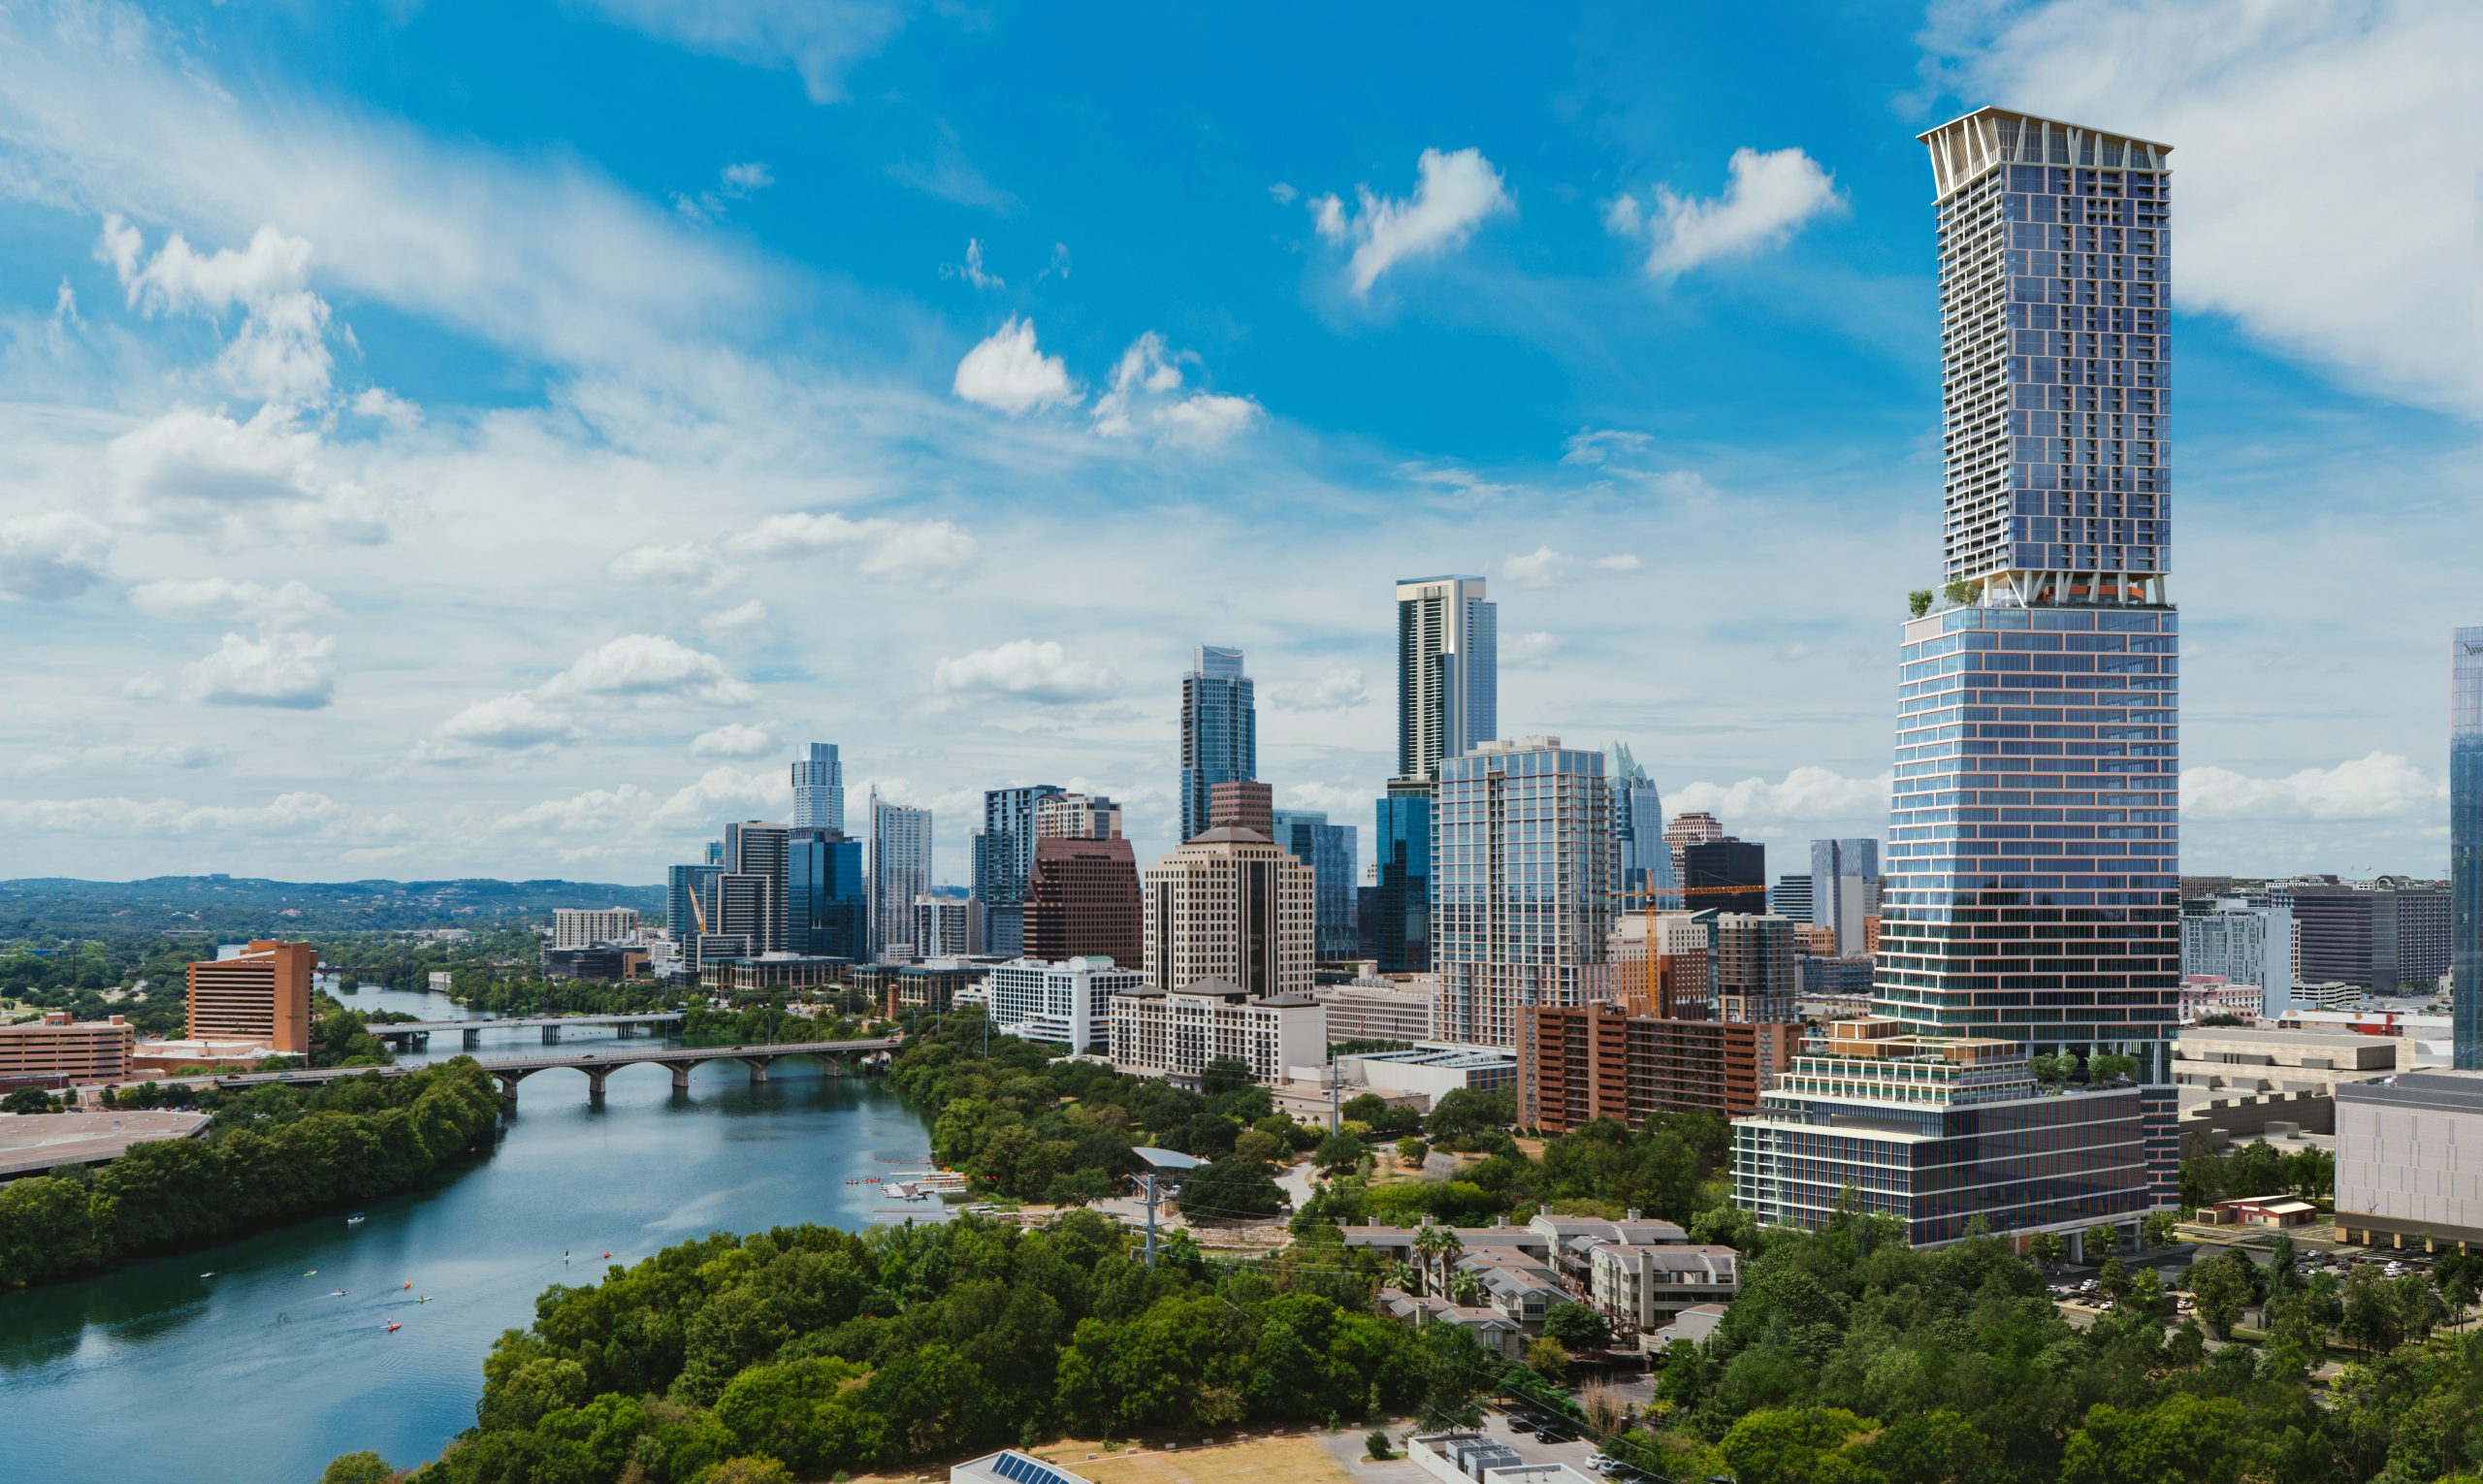 An artist rendering of the Austin skyline with the Waterline on the right of the photo. Soaring to 1,022 feet, Waterline will become the tallest tower in Texas when it opens in 2026. Source: Atchain